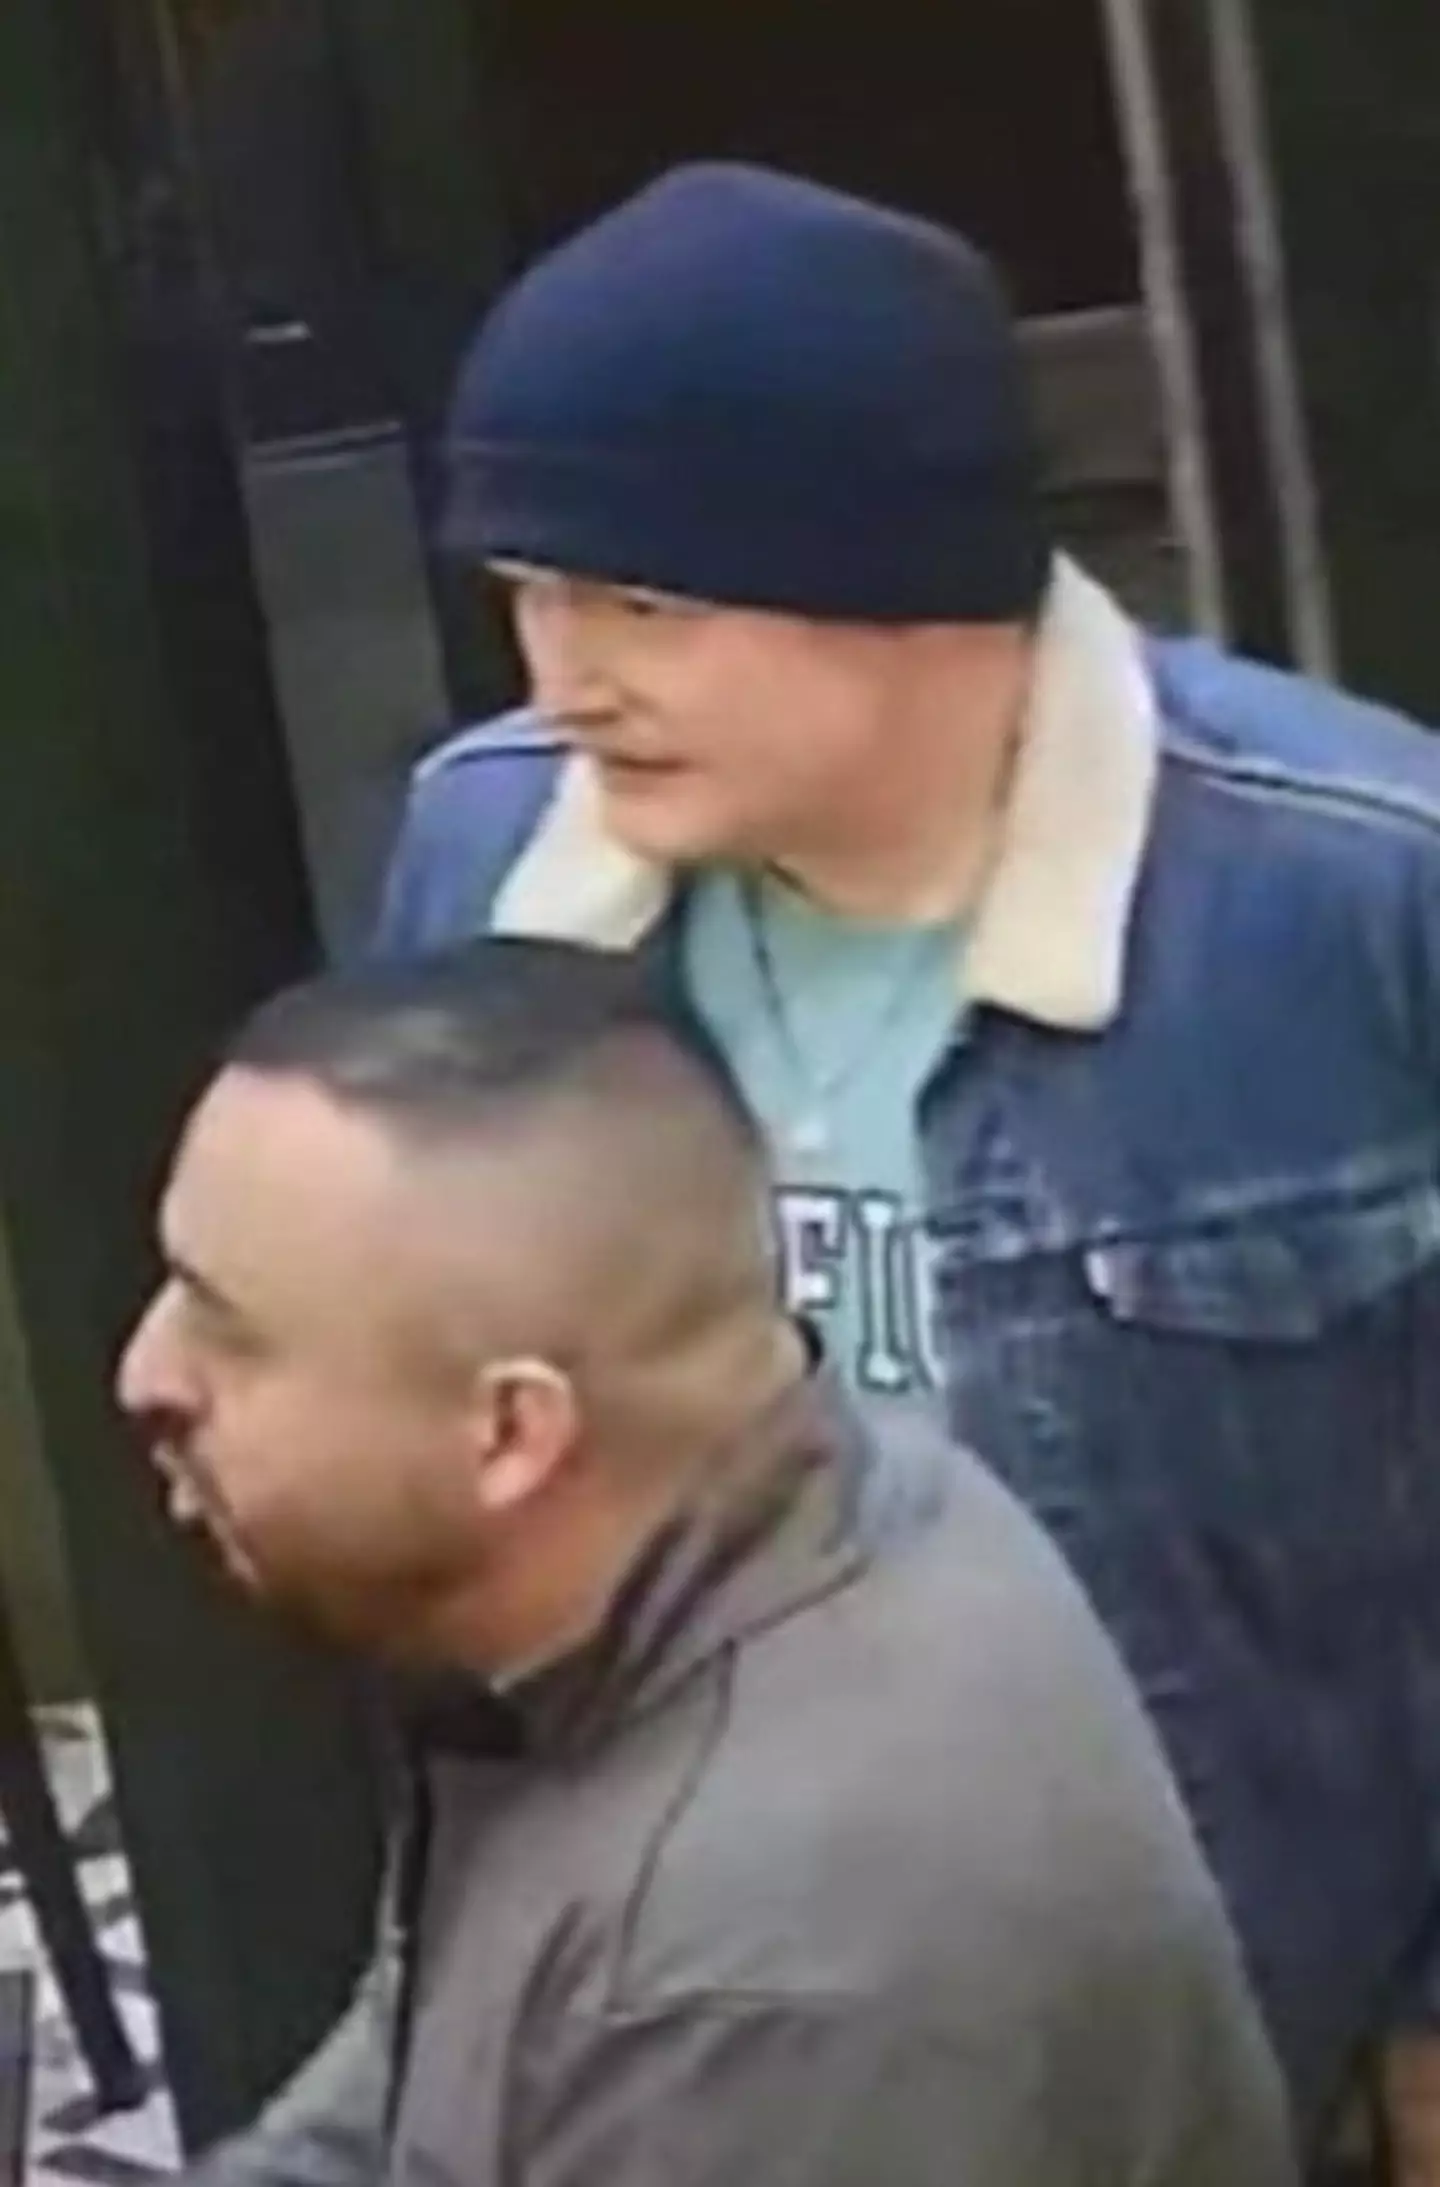 Police are looking for these two men.